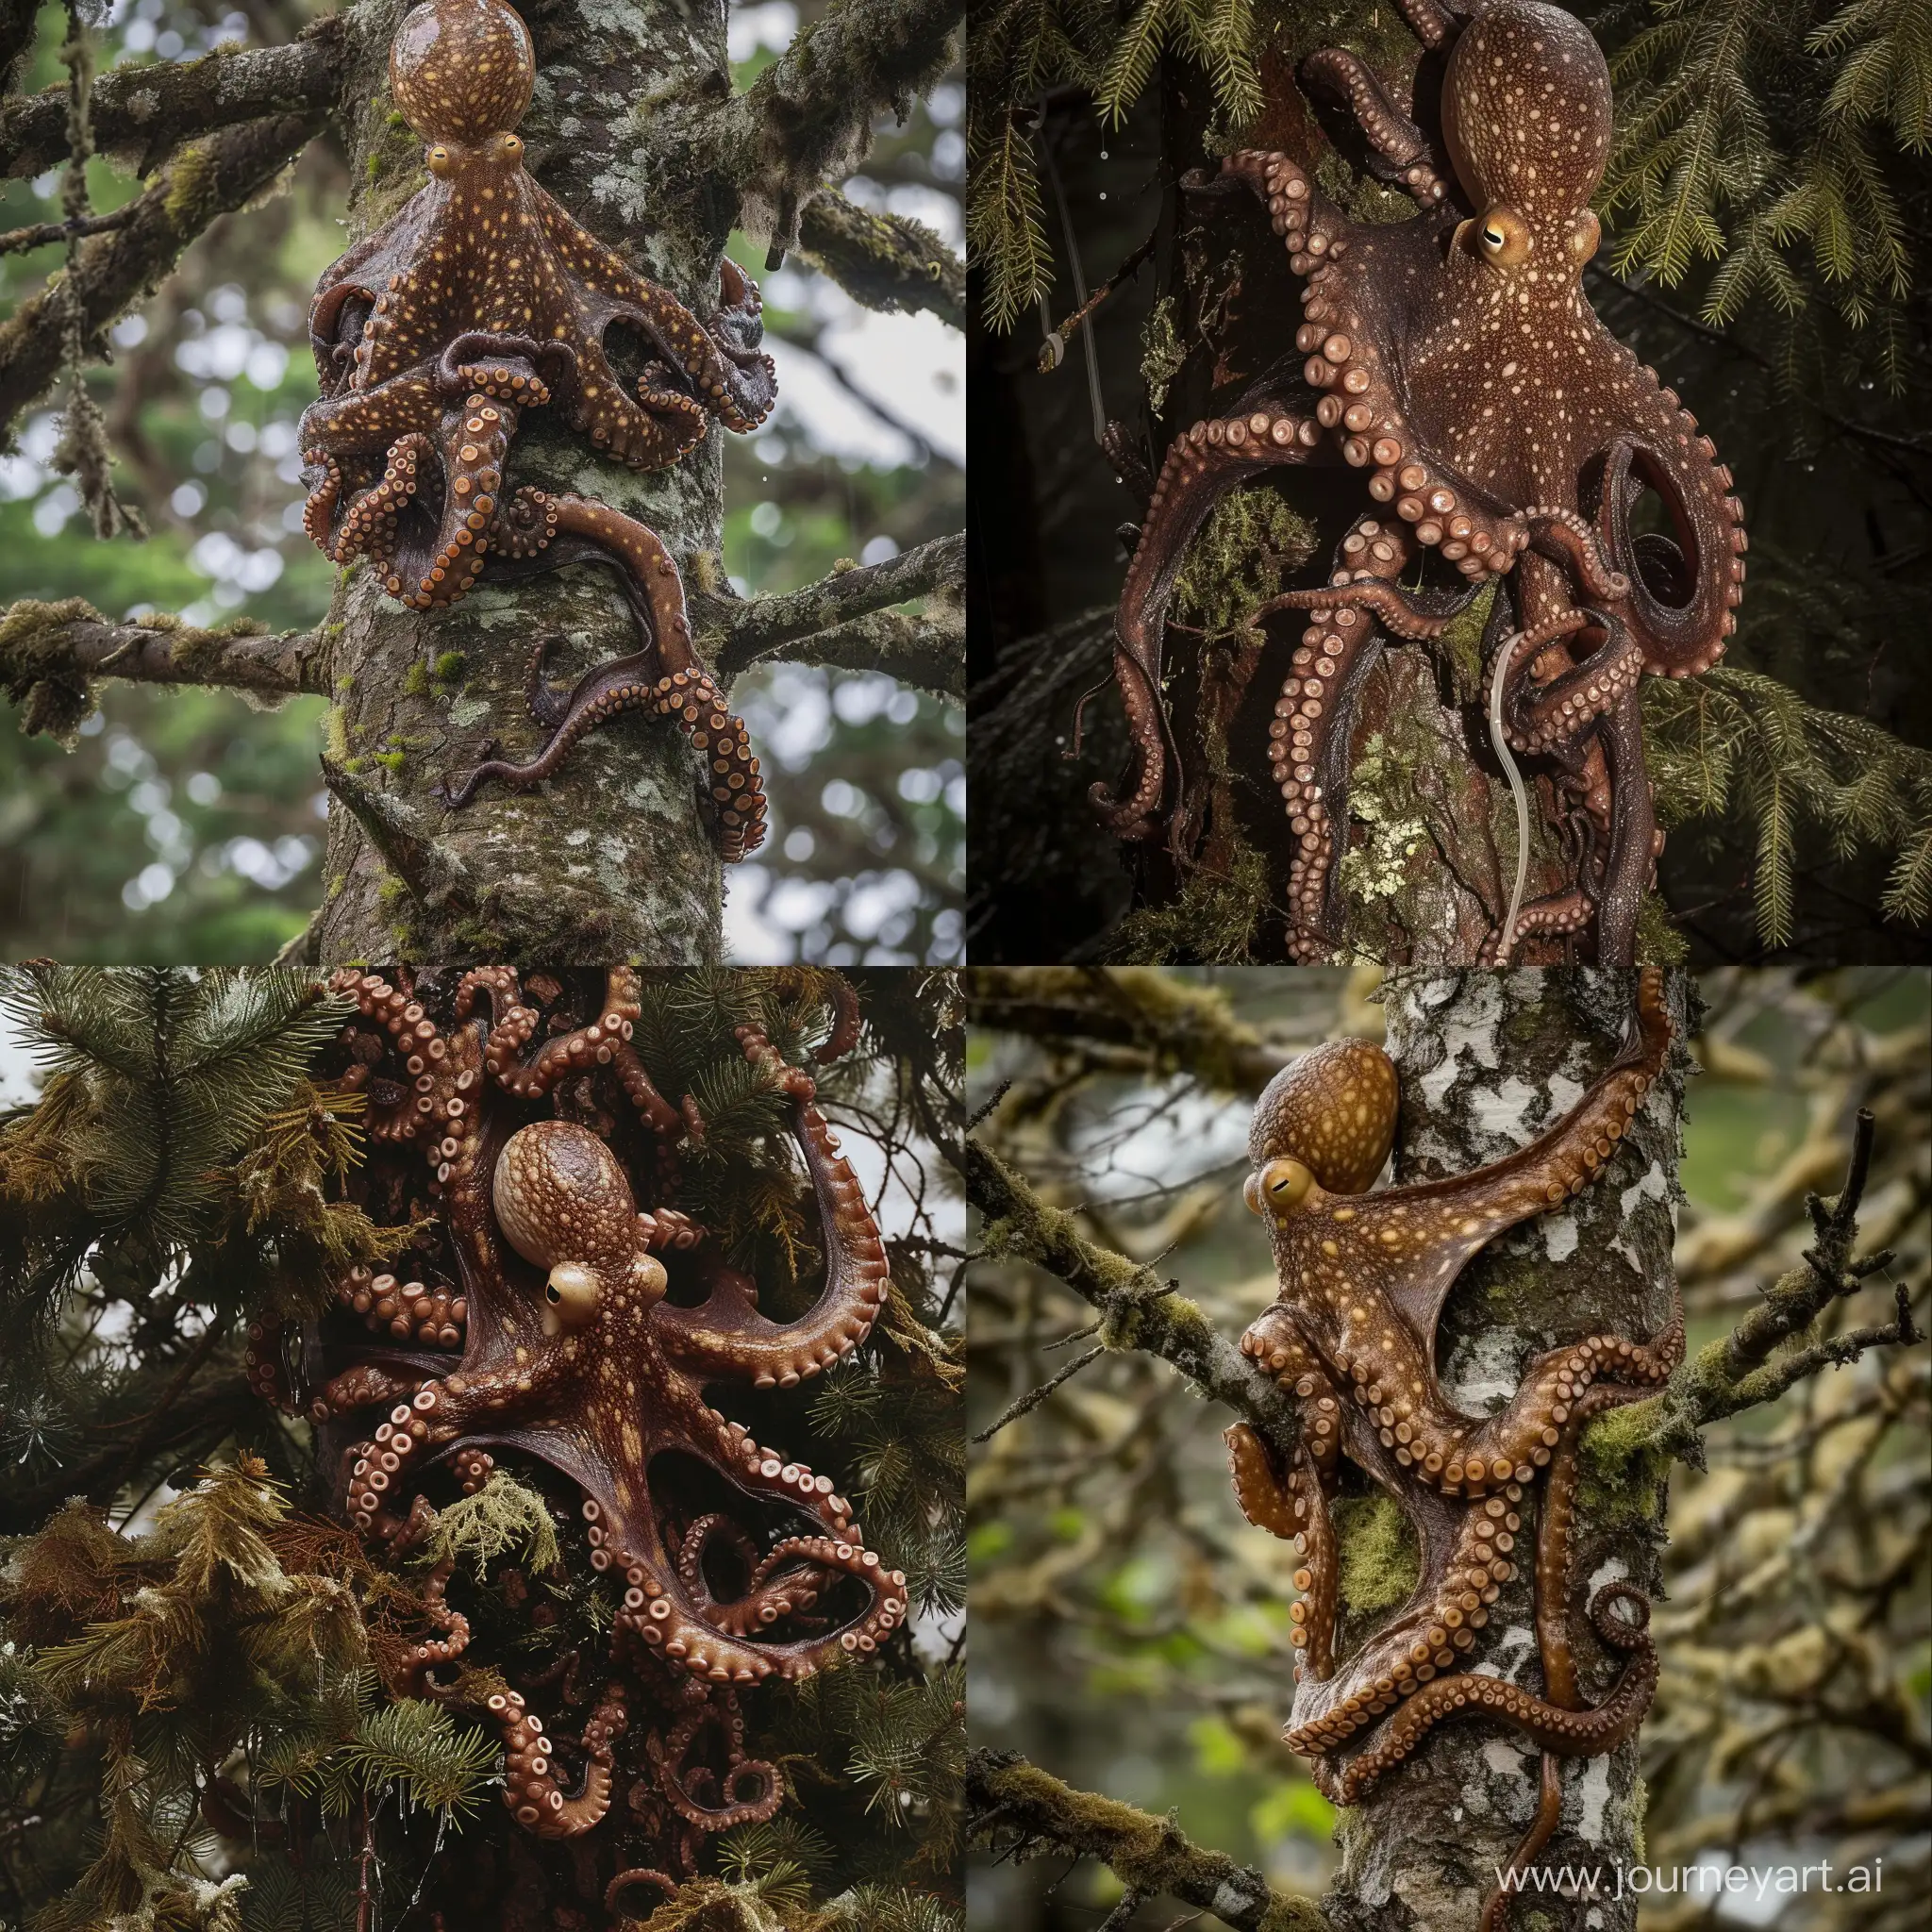 Majestic-Octopus-Climbing-Pine-Tree-in-Temperate-Rainforest